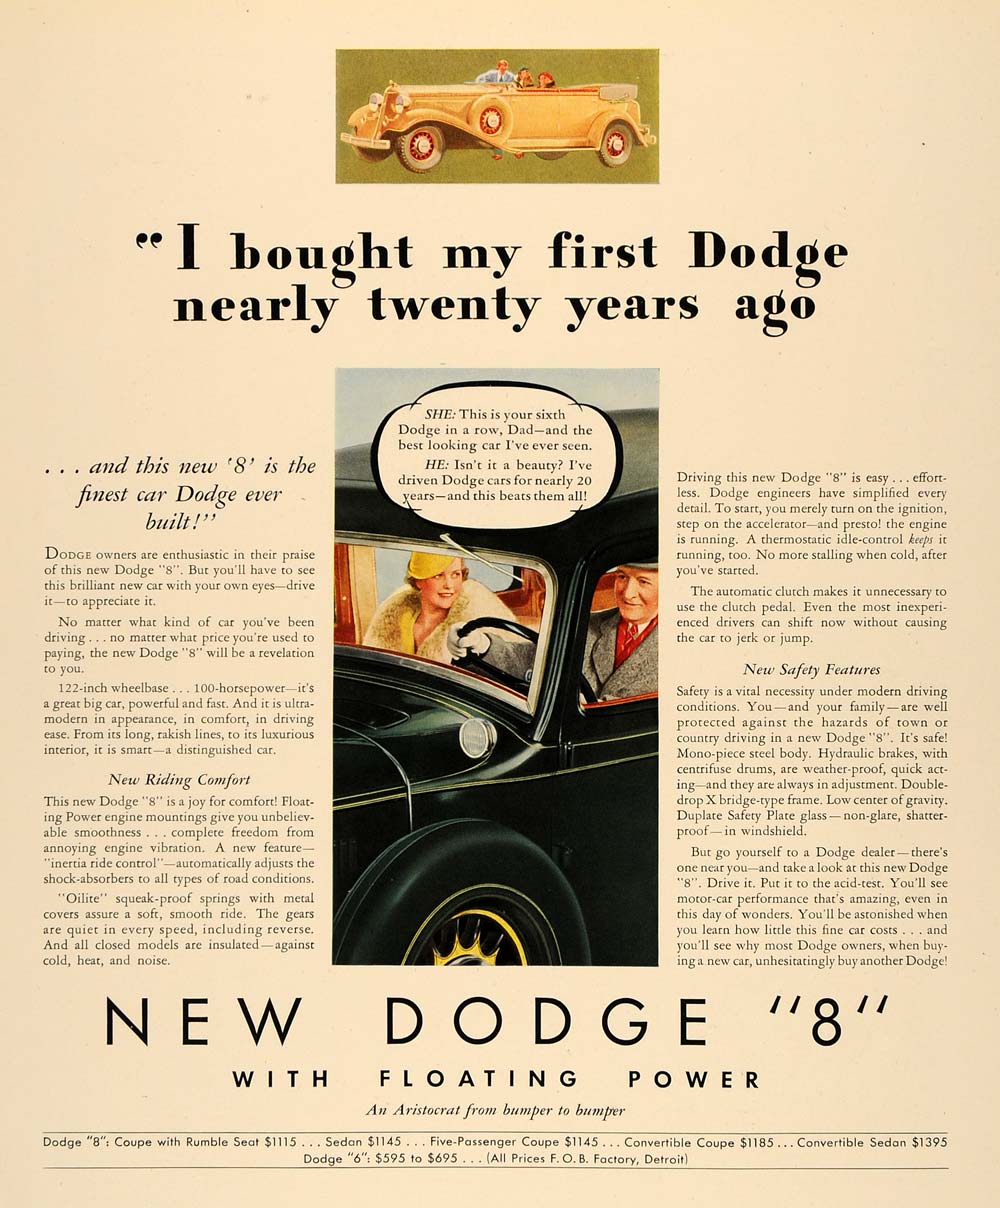 1933 Ad Dodge 8 Vehicle Model Floating Power Oilite - ORIGINAL ADVERTISING F2A